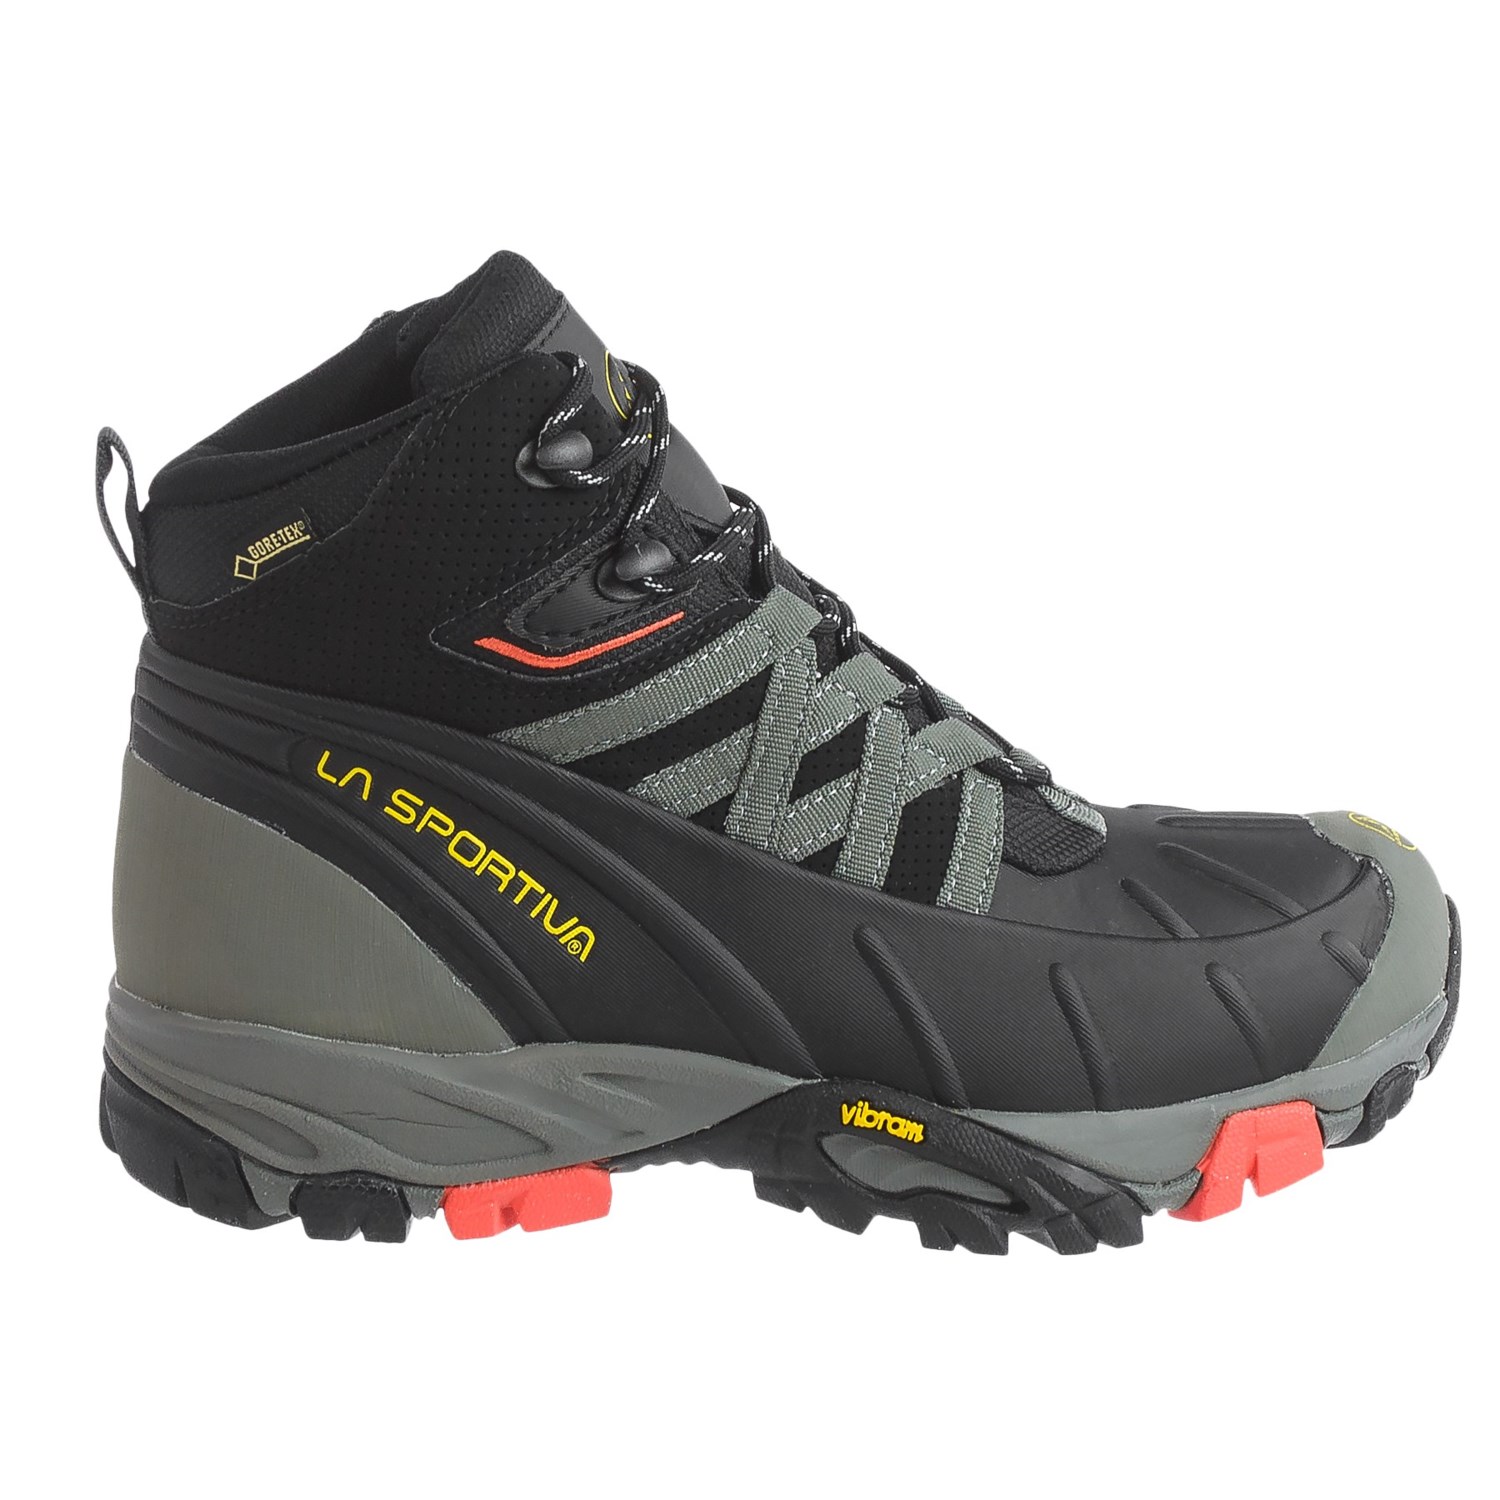 La Sportiva Frost Gore-Tex® Hiking Boots (For Women) - Save 70%